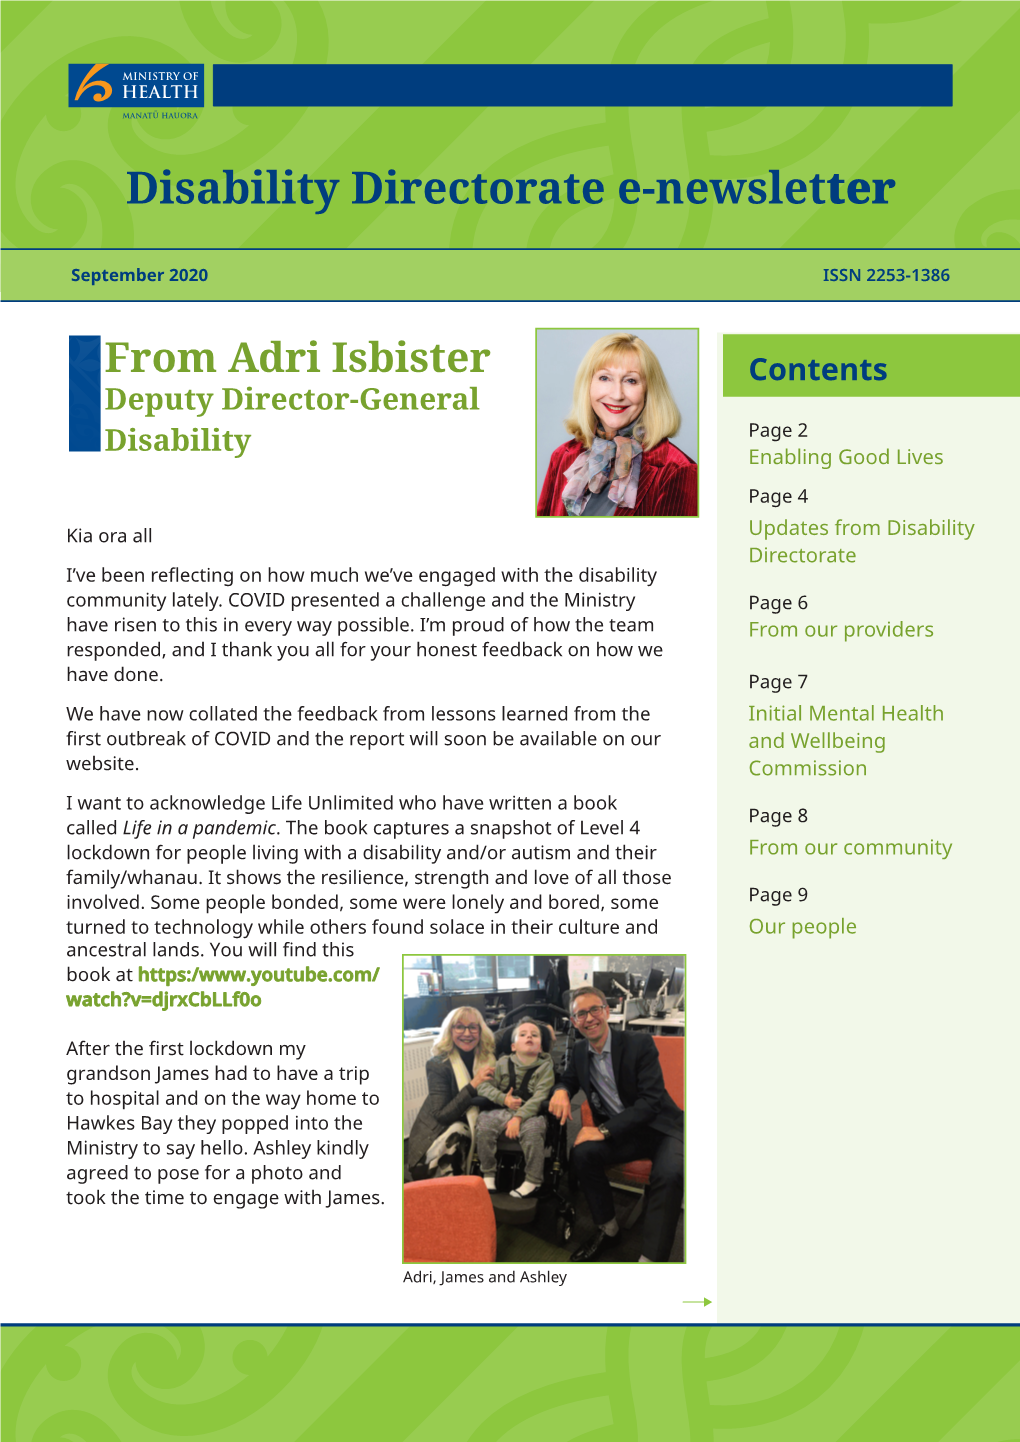 Disability Directorate E-Newsletter